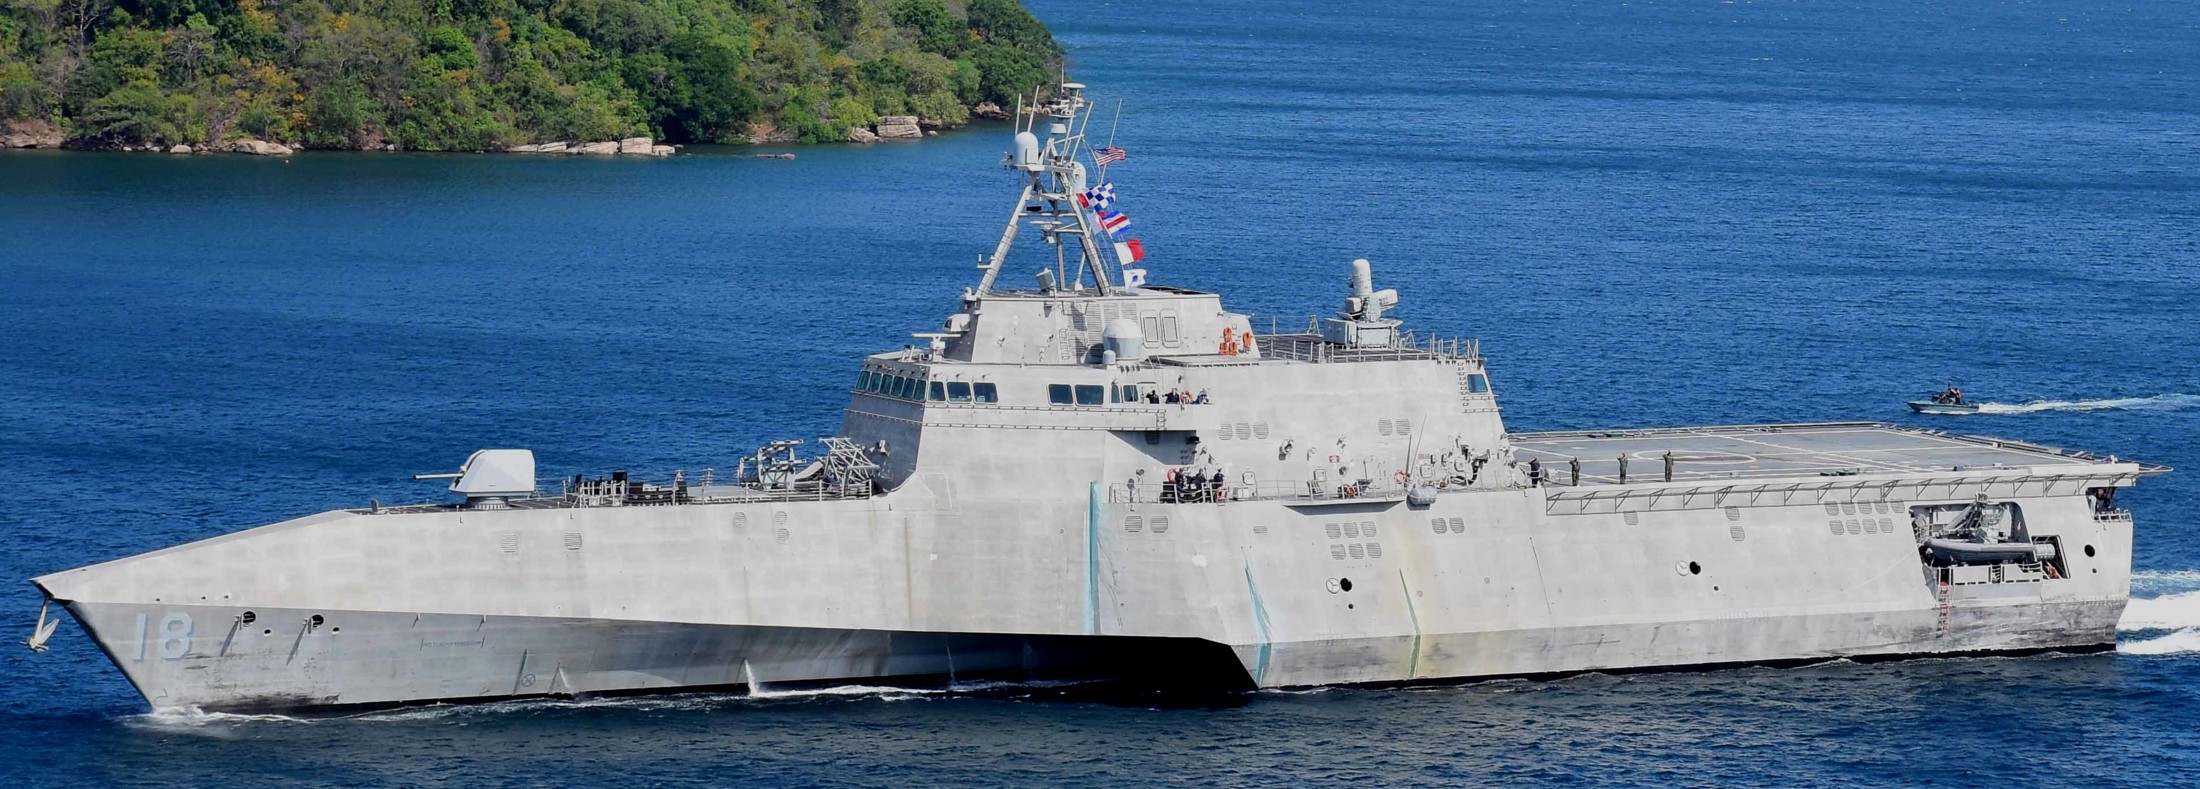 lcs-18 uss charleston independence class littoral combat ship us navy 34